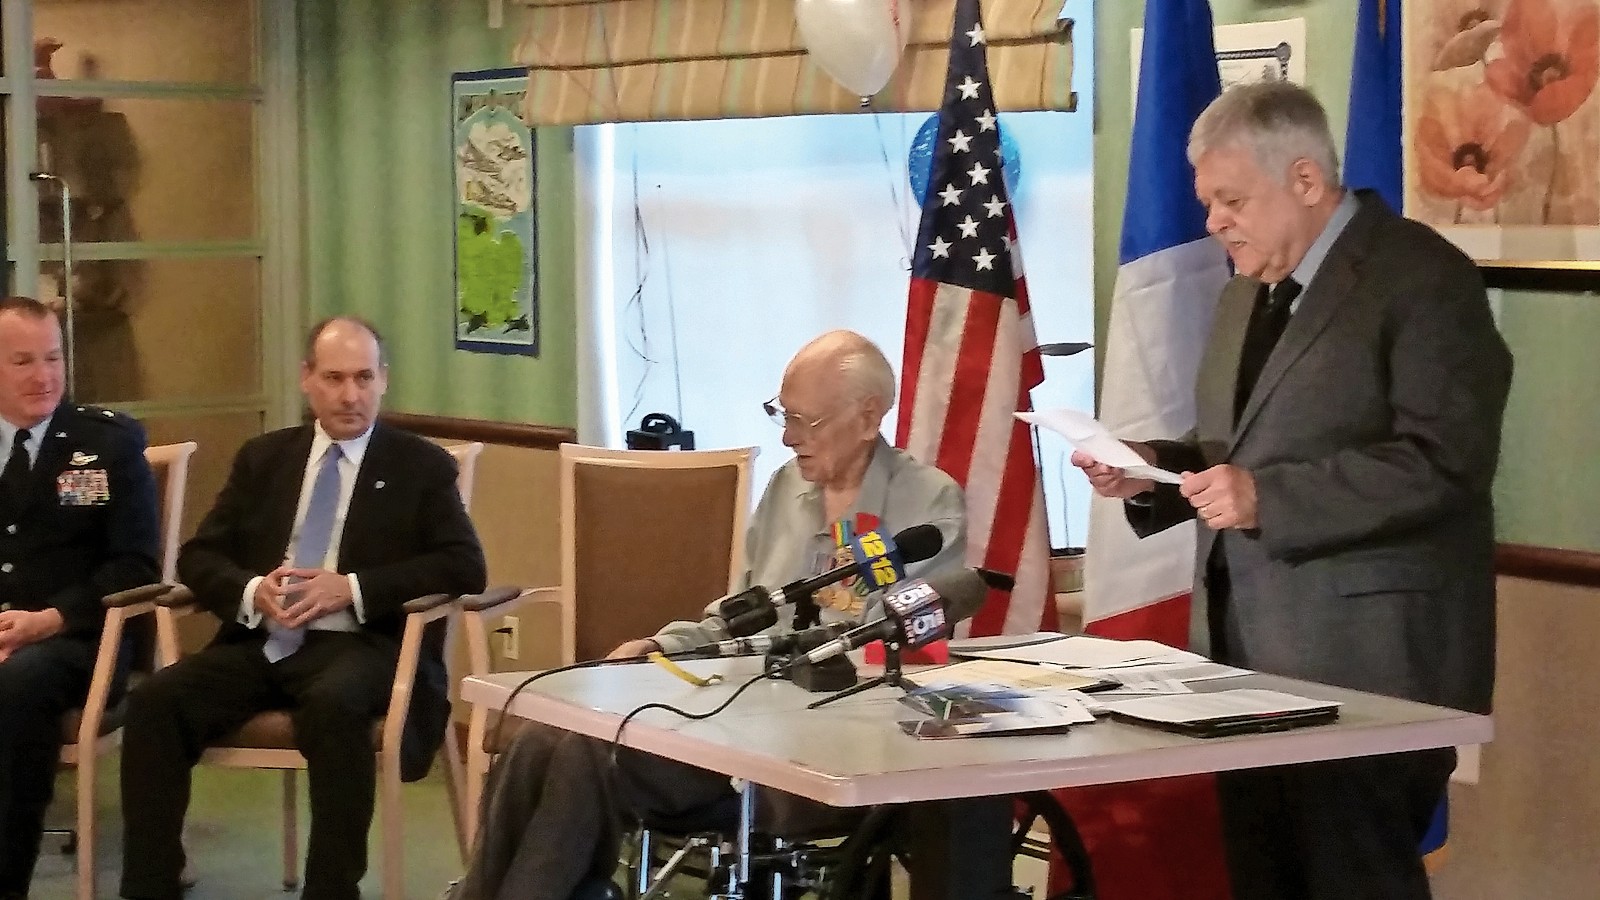 Bruce Smith, far right, speaking to his father about his D-Day honor with General Owens and Colonel Frédéric Vigneron listening